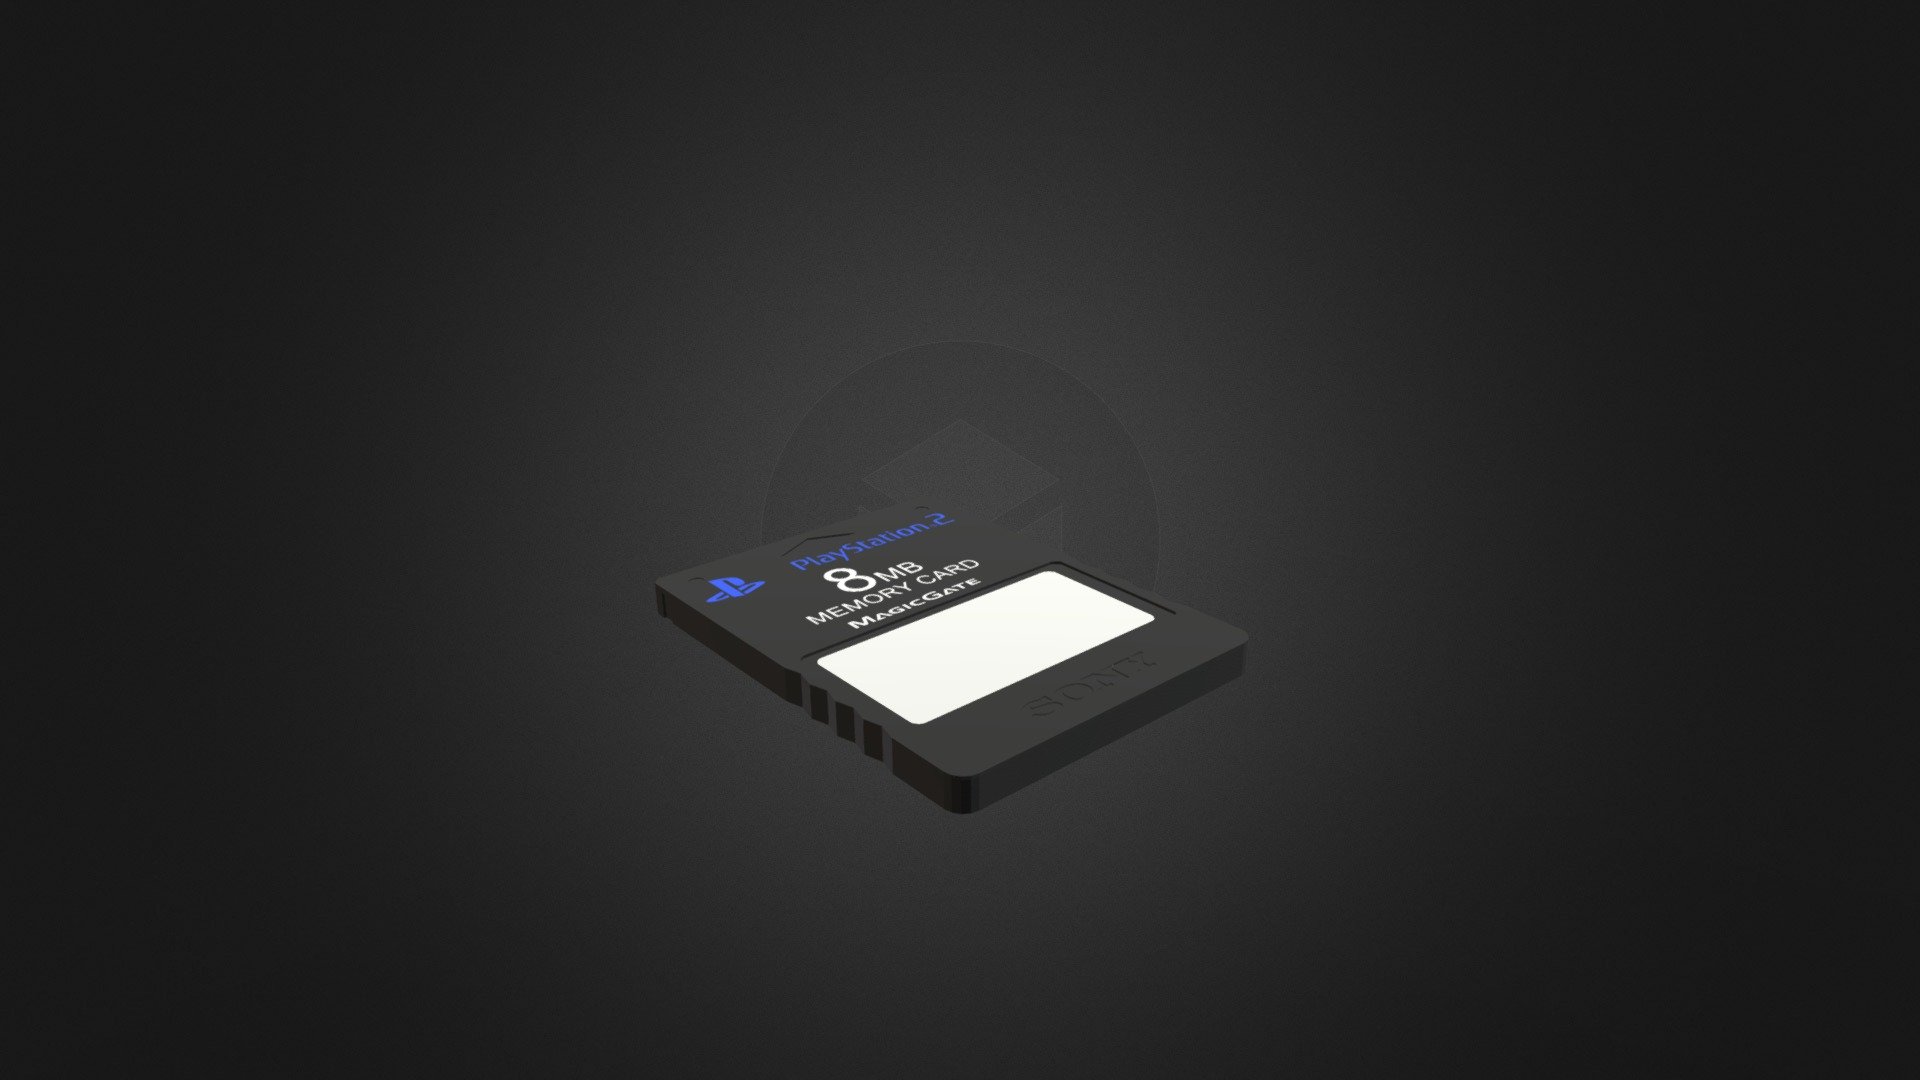 PS2 memery card with high detail and poly count 

all textuers can be edited or replaced

downloading the FBX gives you the Blender file as well as a photoshop/krita file to edit the textuer - high detail PS2 Memory card - Download Free 3D model by btomaek 3d model